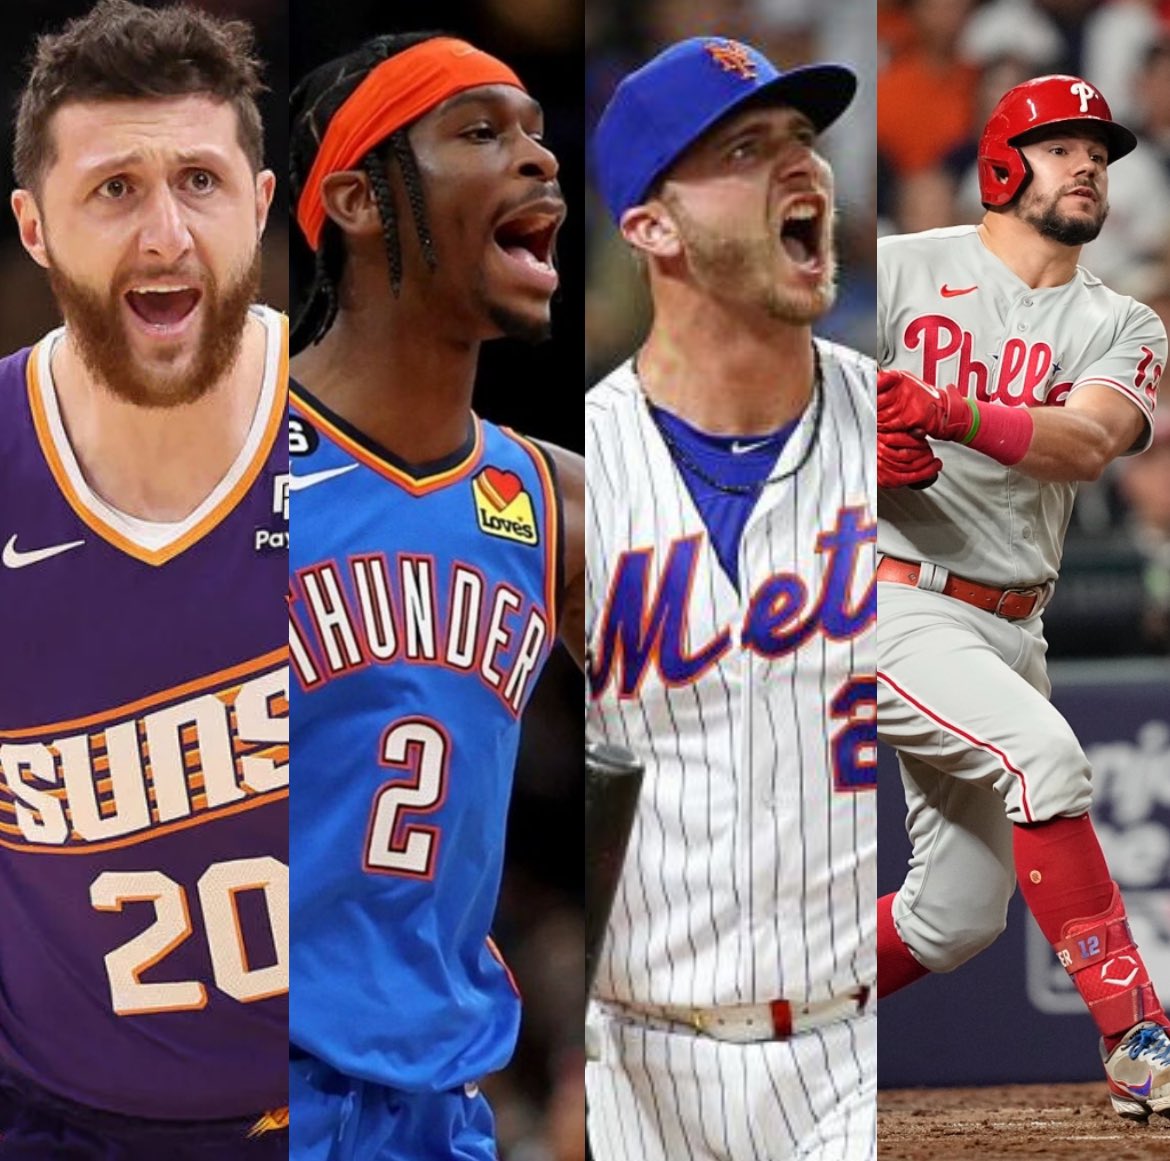 BEST NBA/MLB PLAYS (4/13) 👨‍🔬🧪 Jusuf Nurkic “O” 10.5 Rebounds (-115 MGM) Shai Alexander “O” 26.5 Points (-120 MGM) Pete Alonso “O” 0.5 Hits (-135 DK) Kyle Schwarber “O” 0.5 Hits (-140 DK) $100 to someone who likes and reposts this post if we go 4/4 👀❤️ #sports #sleeper…